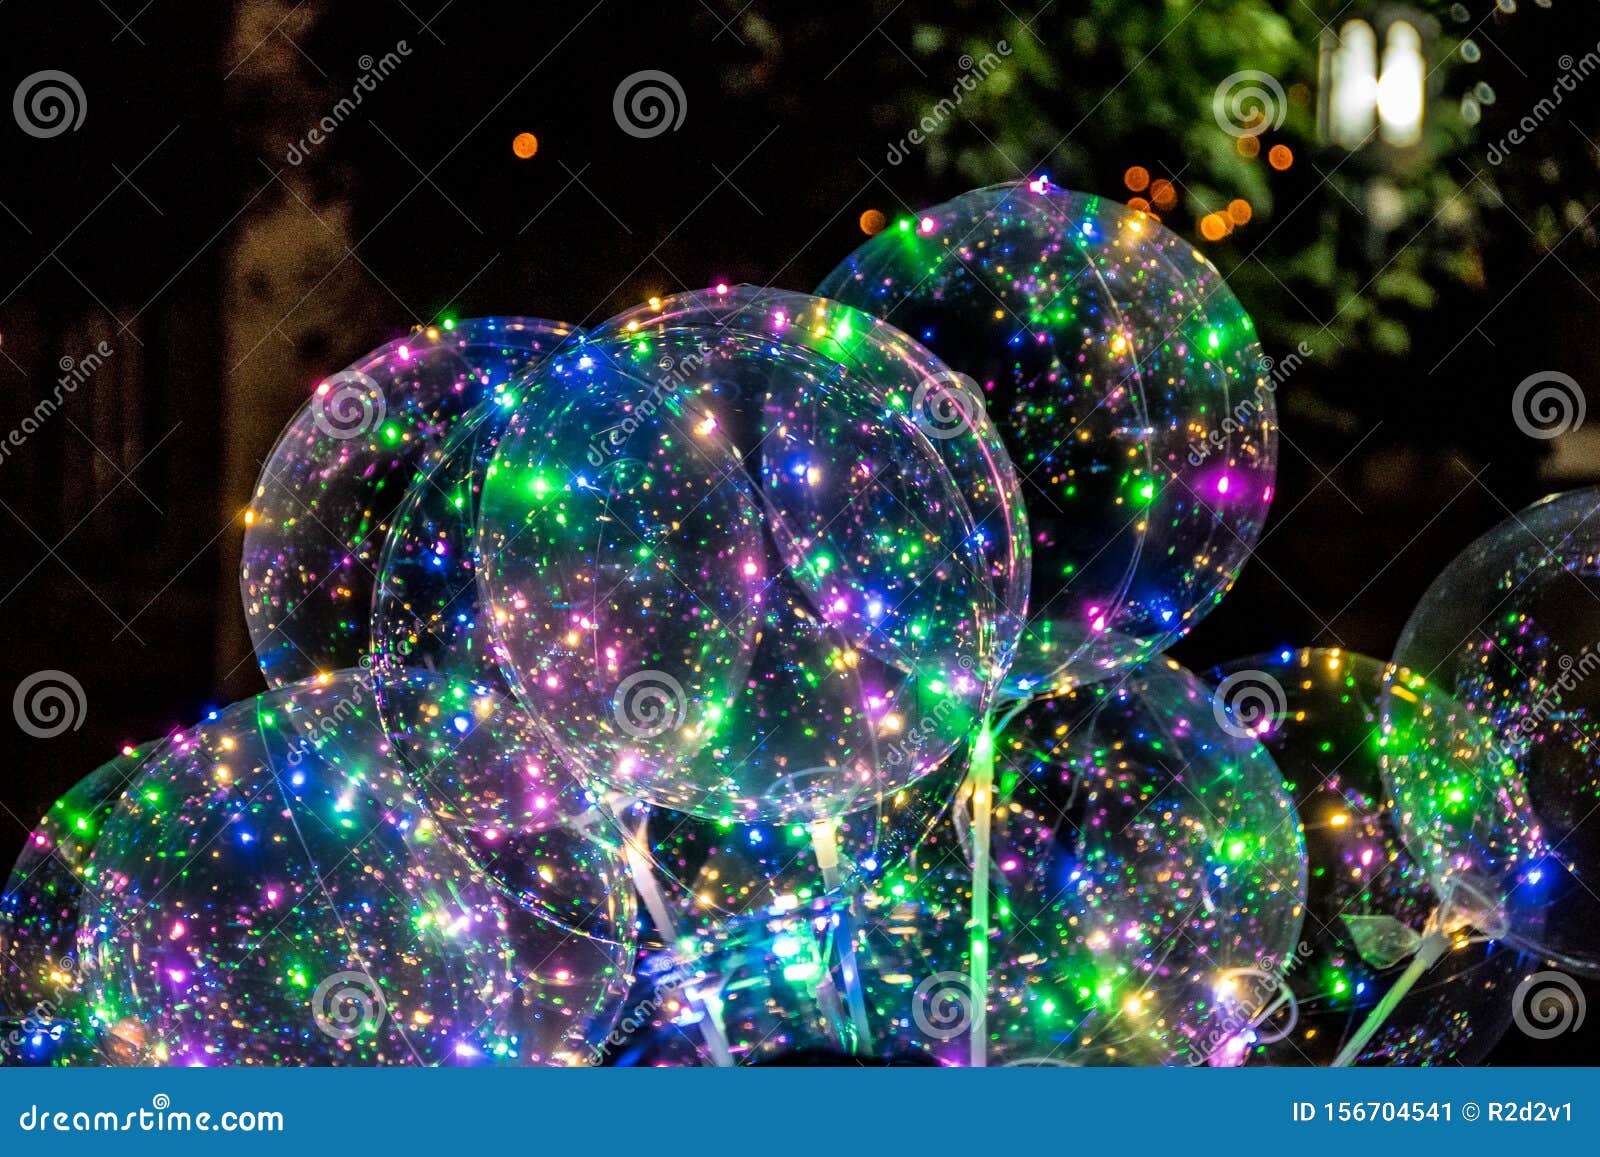 A Bunch of Balloons with LED Lights Stock Image - Image of evening